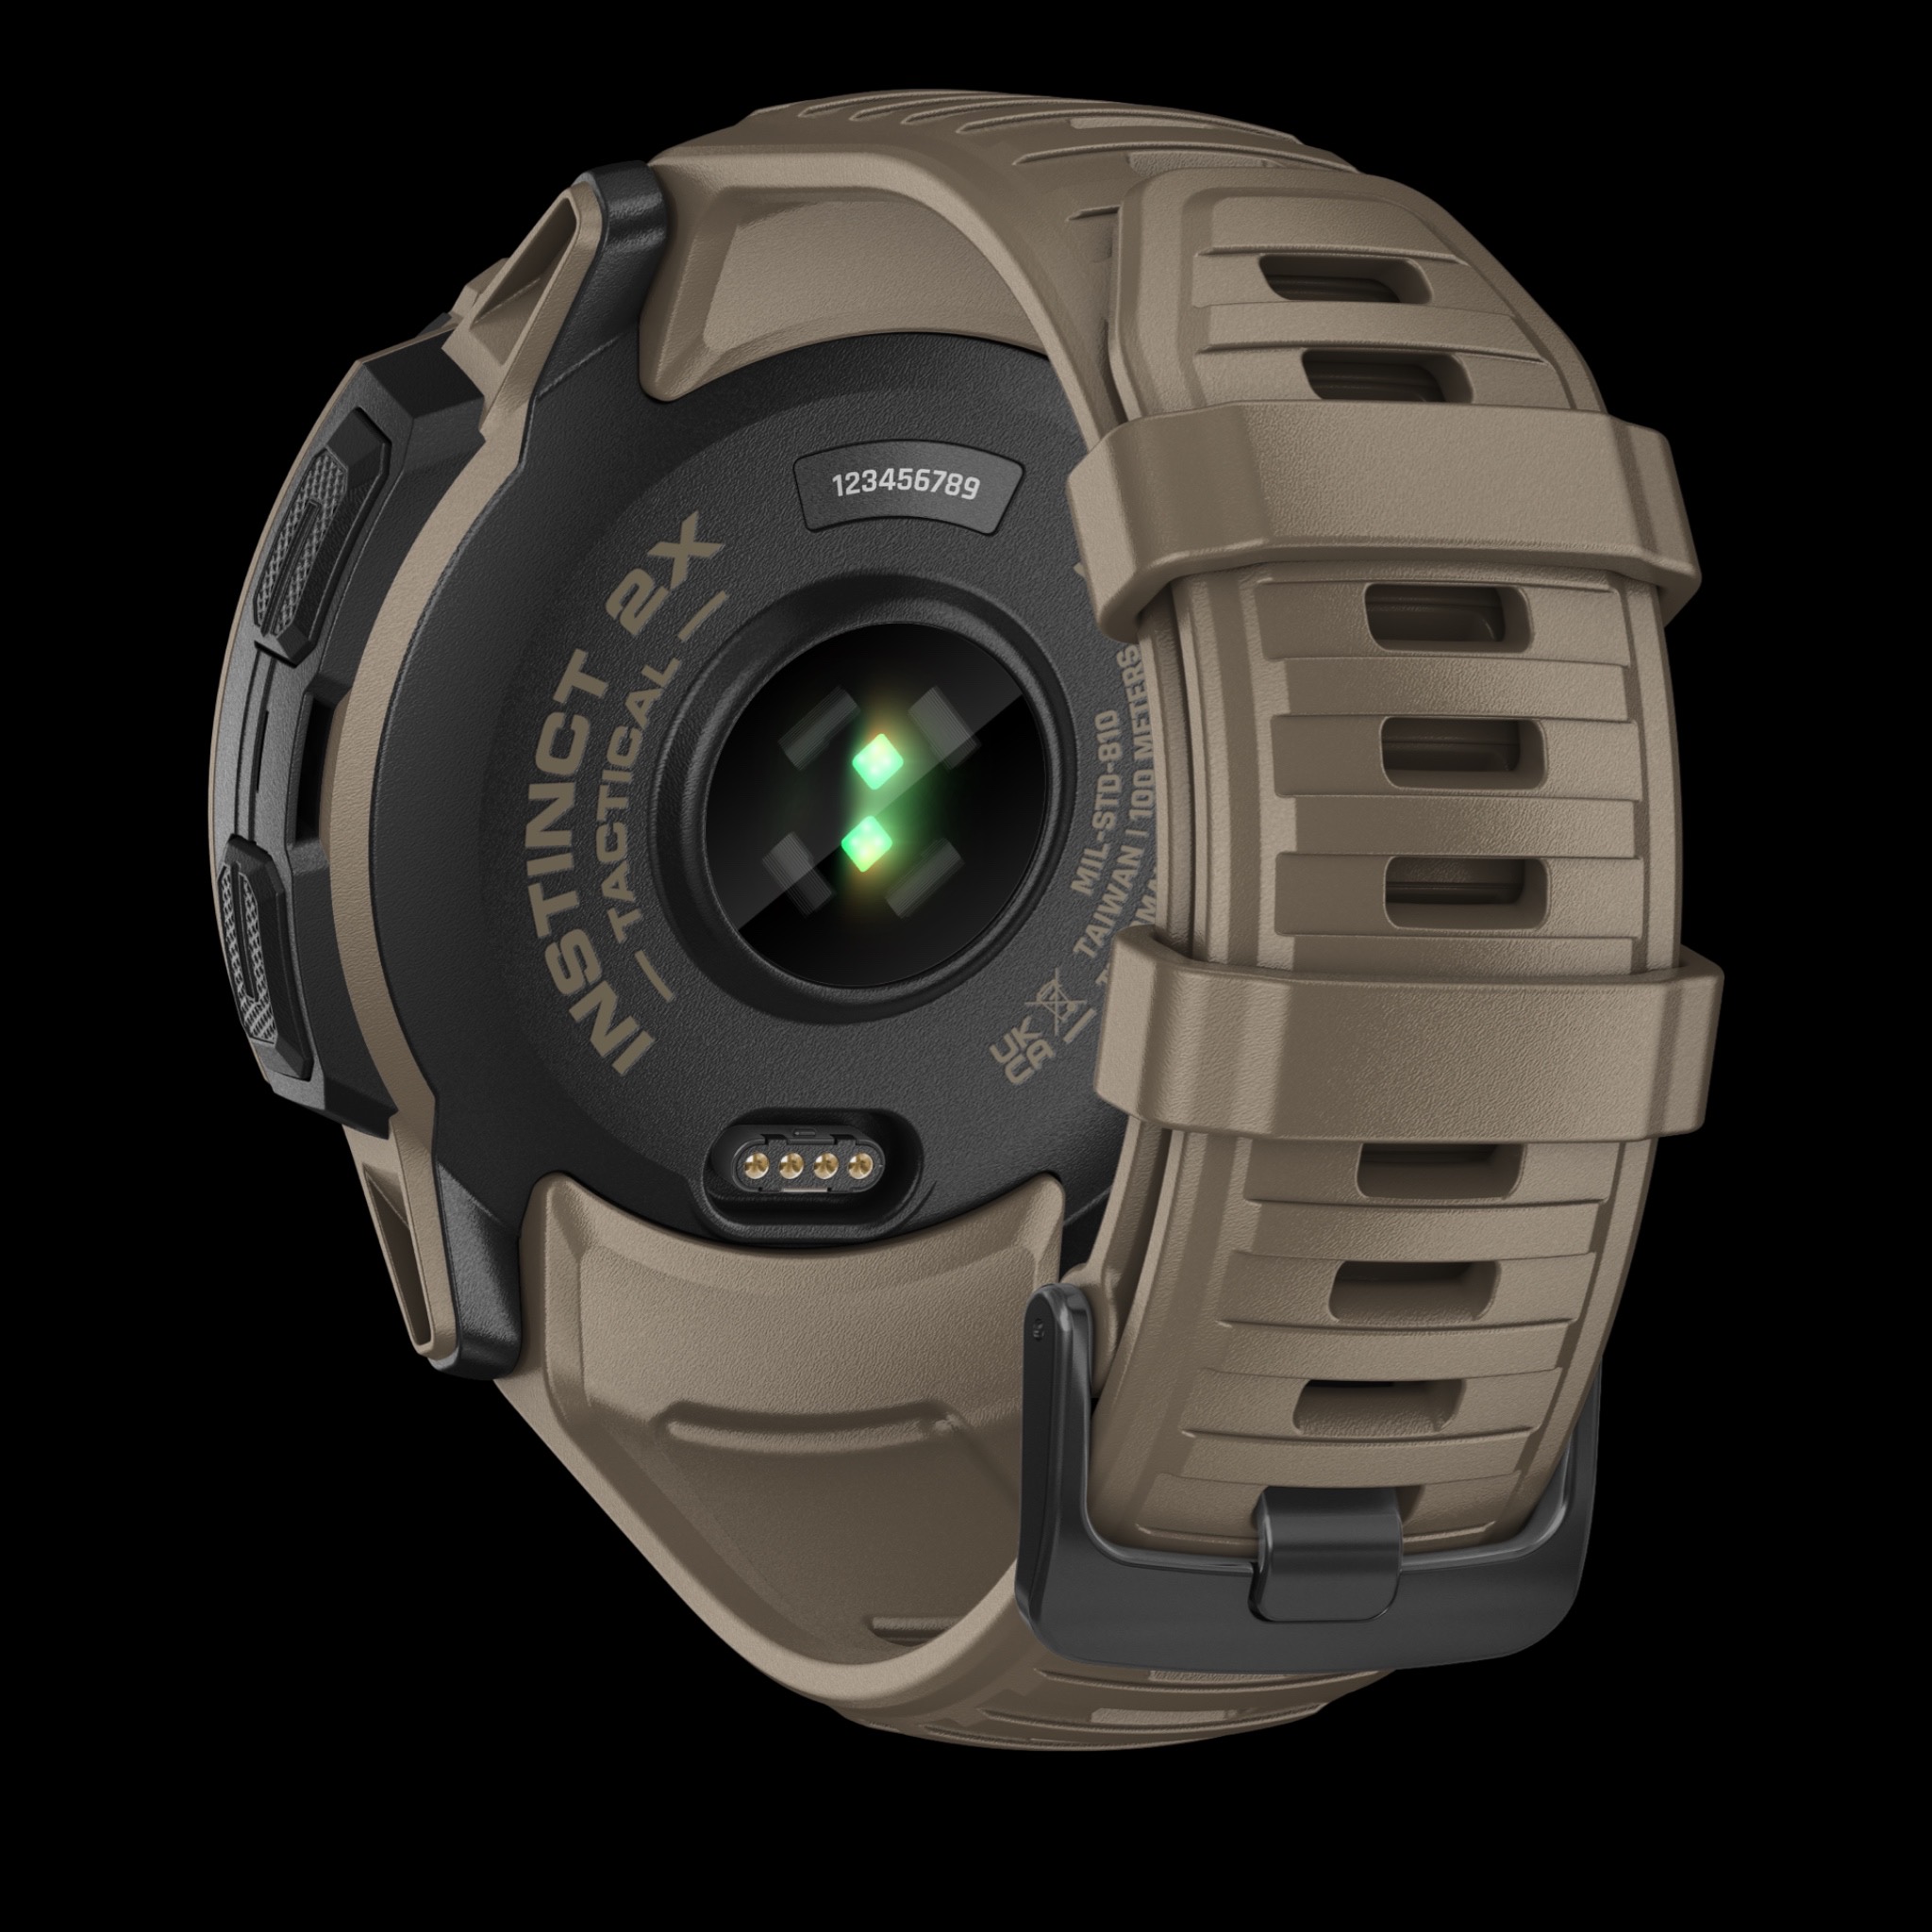 Garmin releases the Instinct Tactical Edition watch